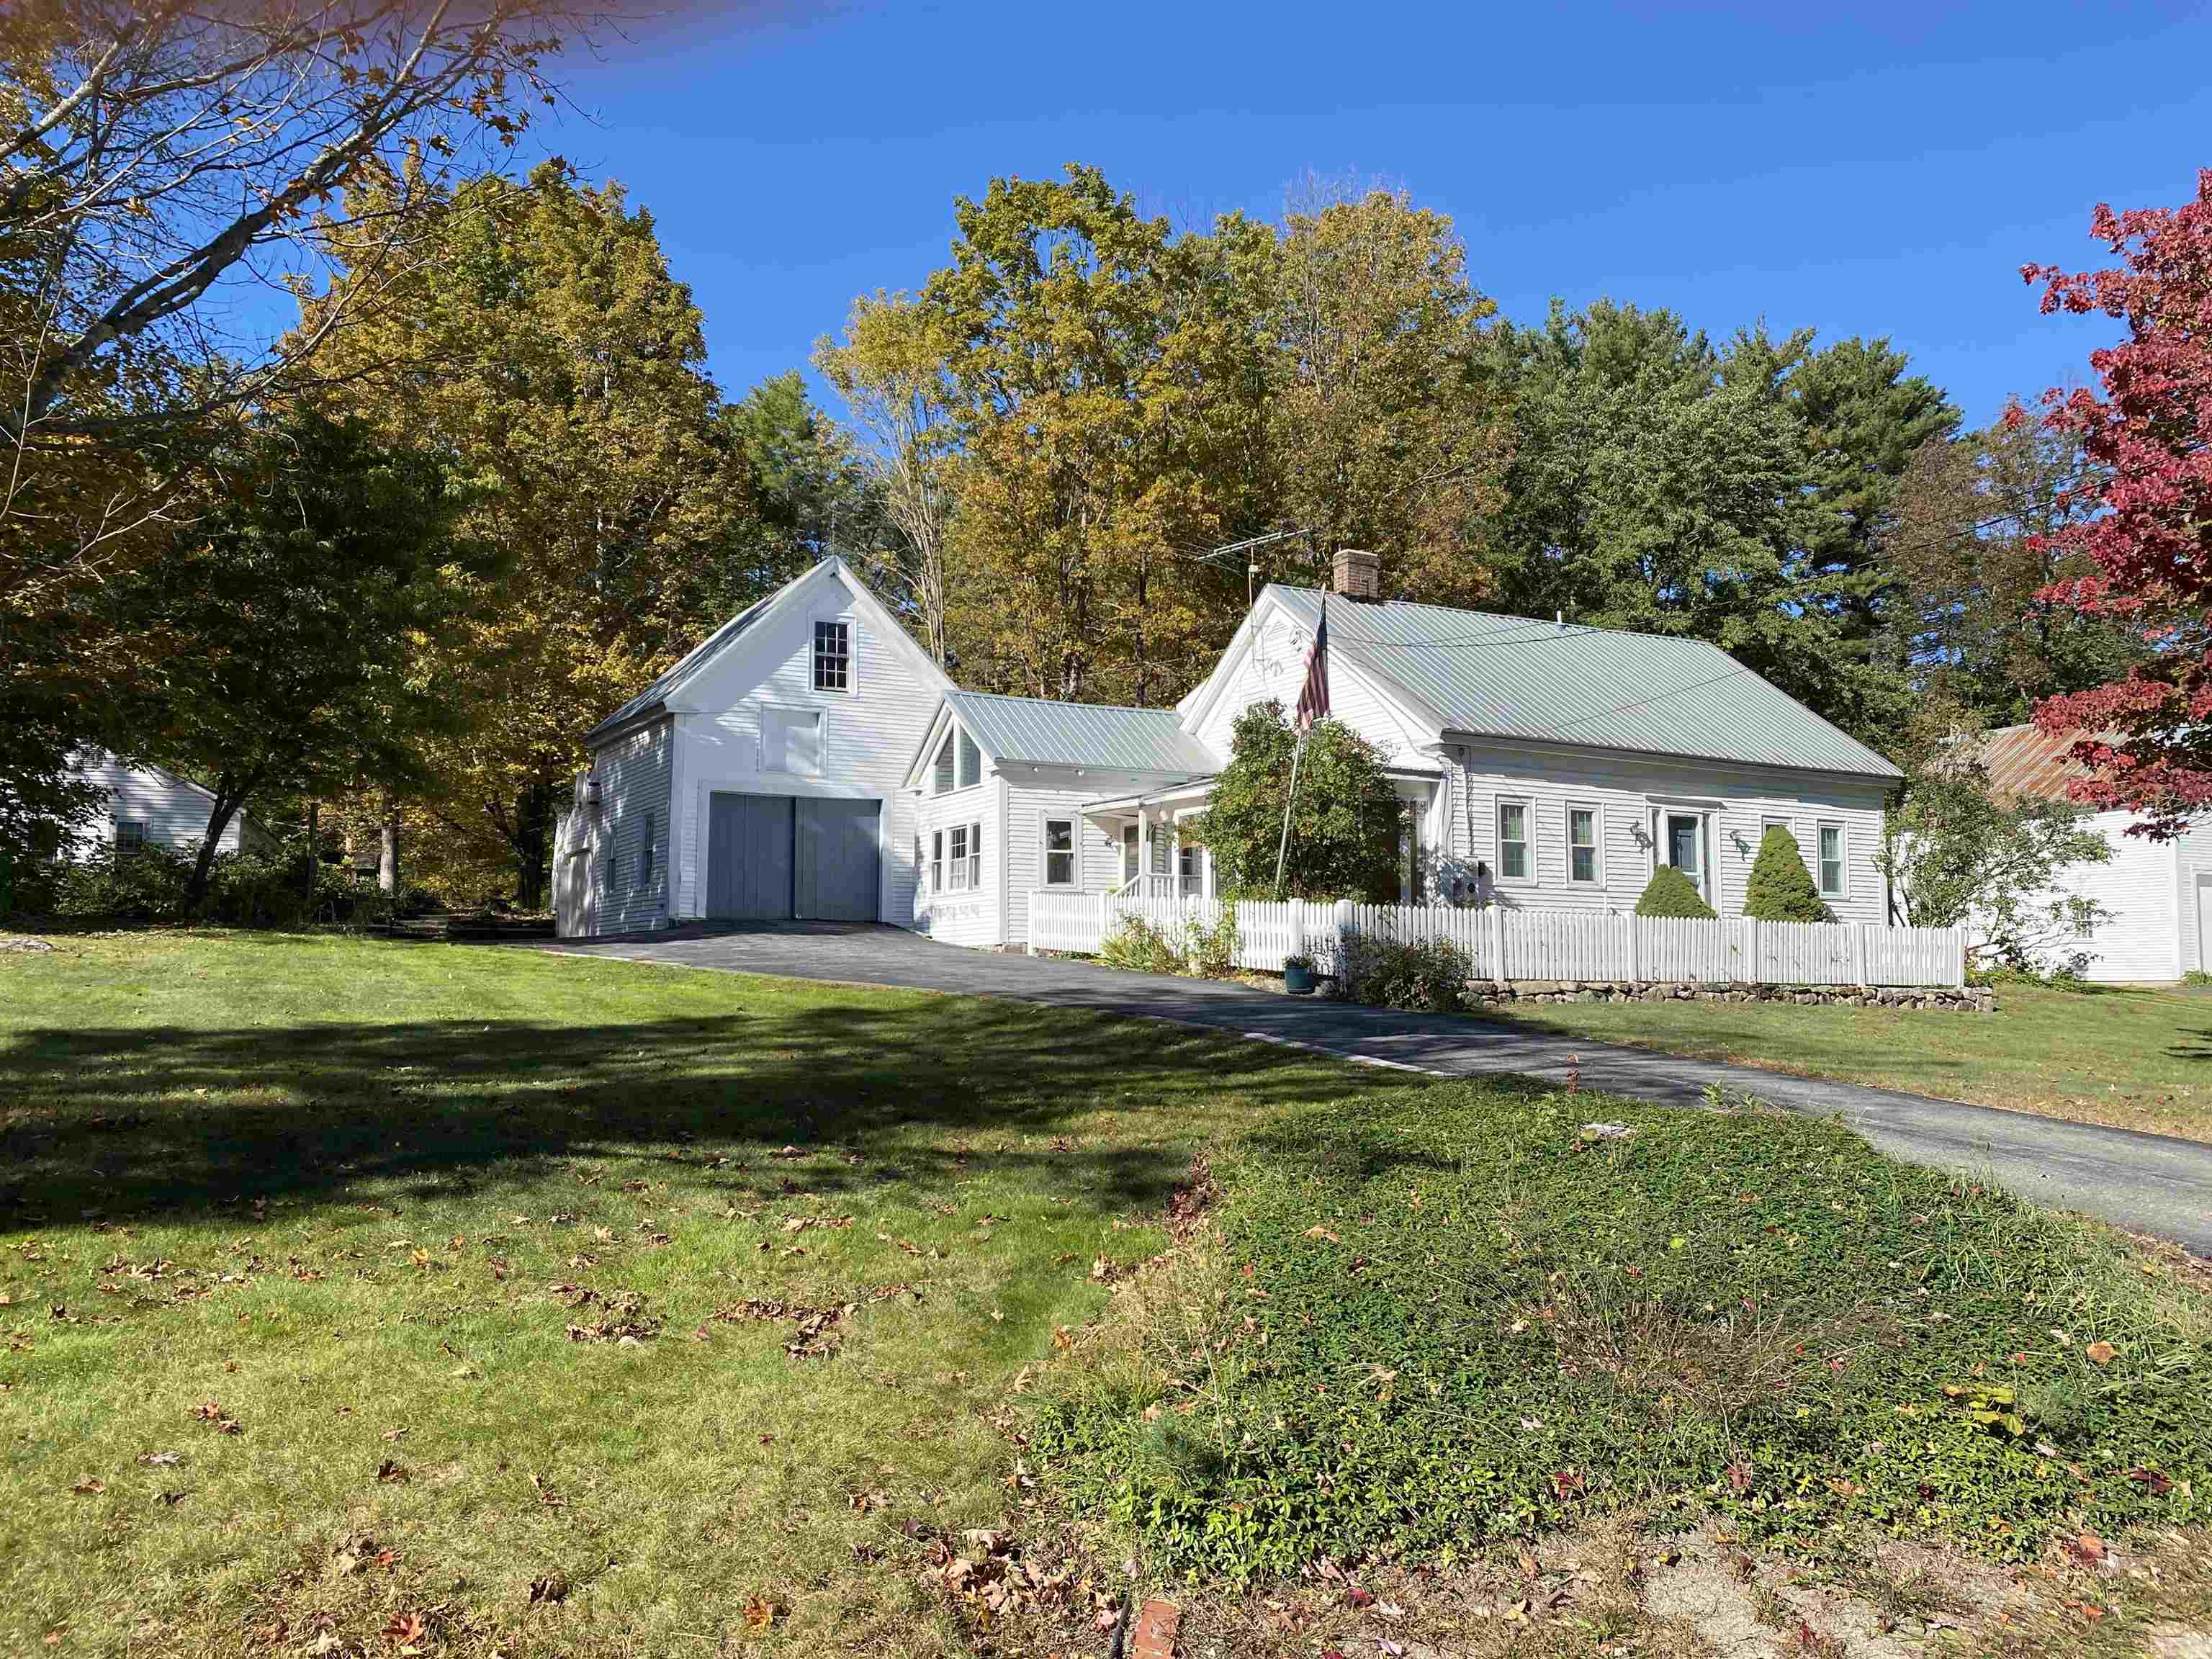 FREEDOM NH Homes for sale